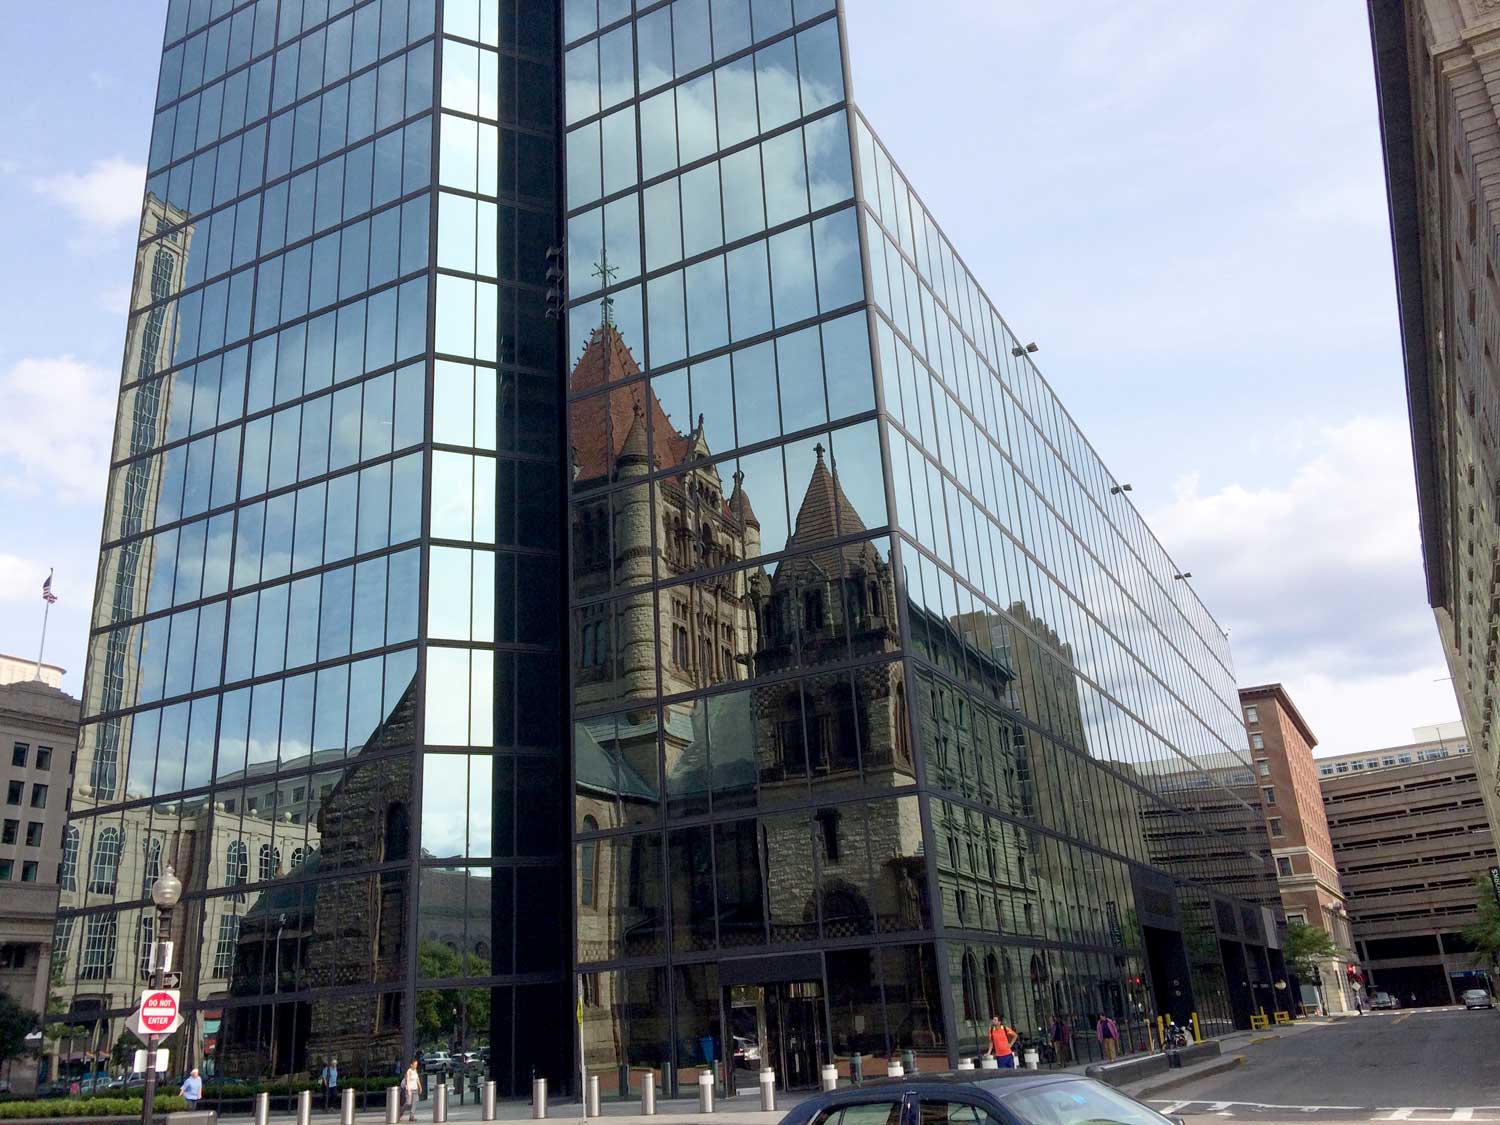 <p>The facade of Trinity Church reflected in the glass of Hancock Tower base, NE corner</p>